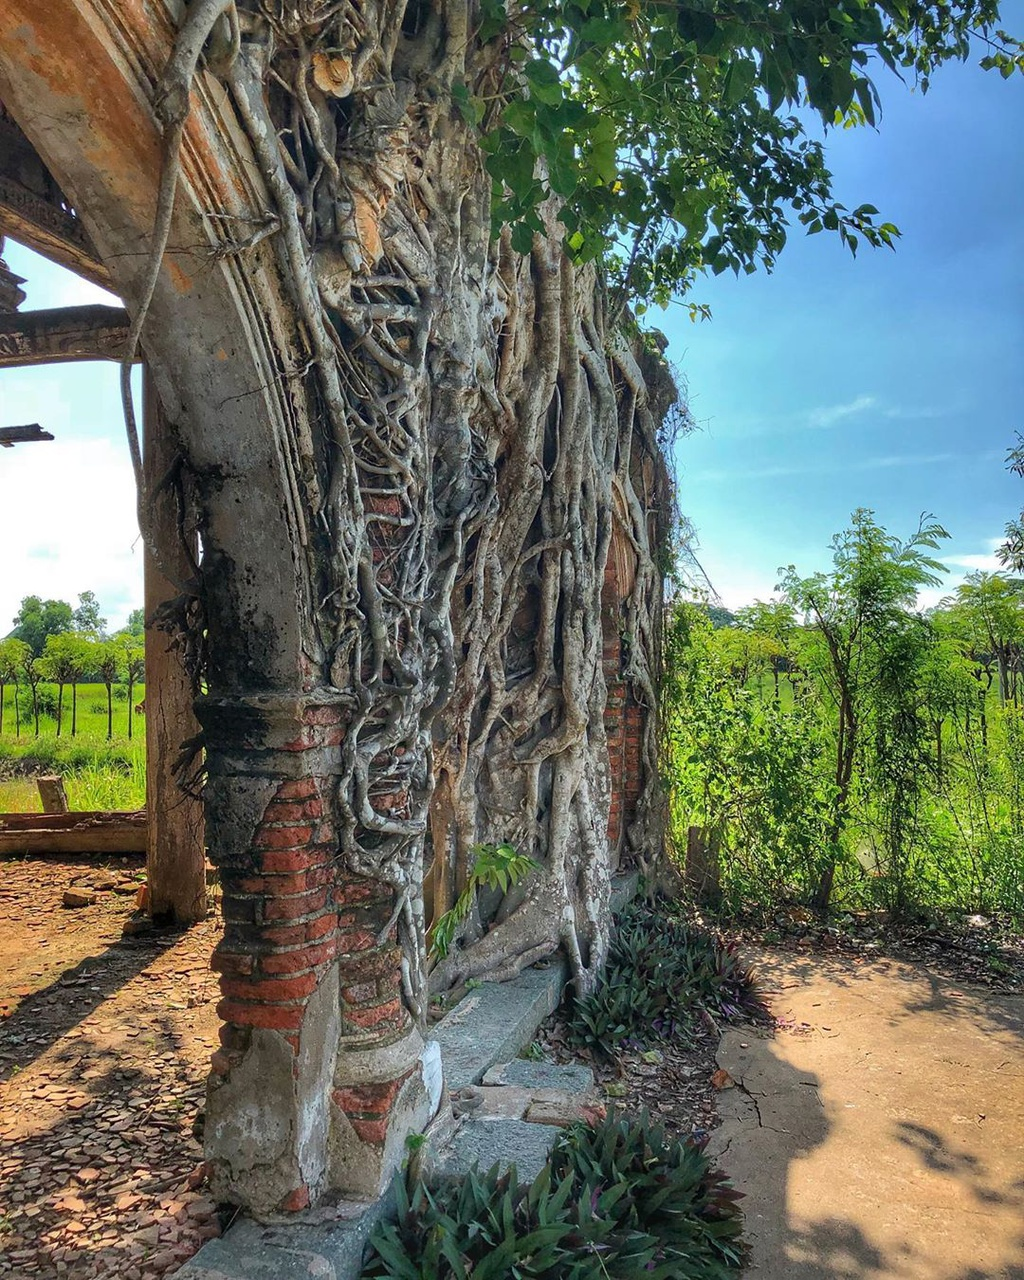 unique centenarian communal house embraced by bodhi tree roots in vietnams mekong delta